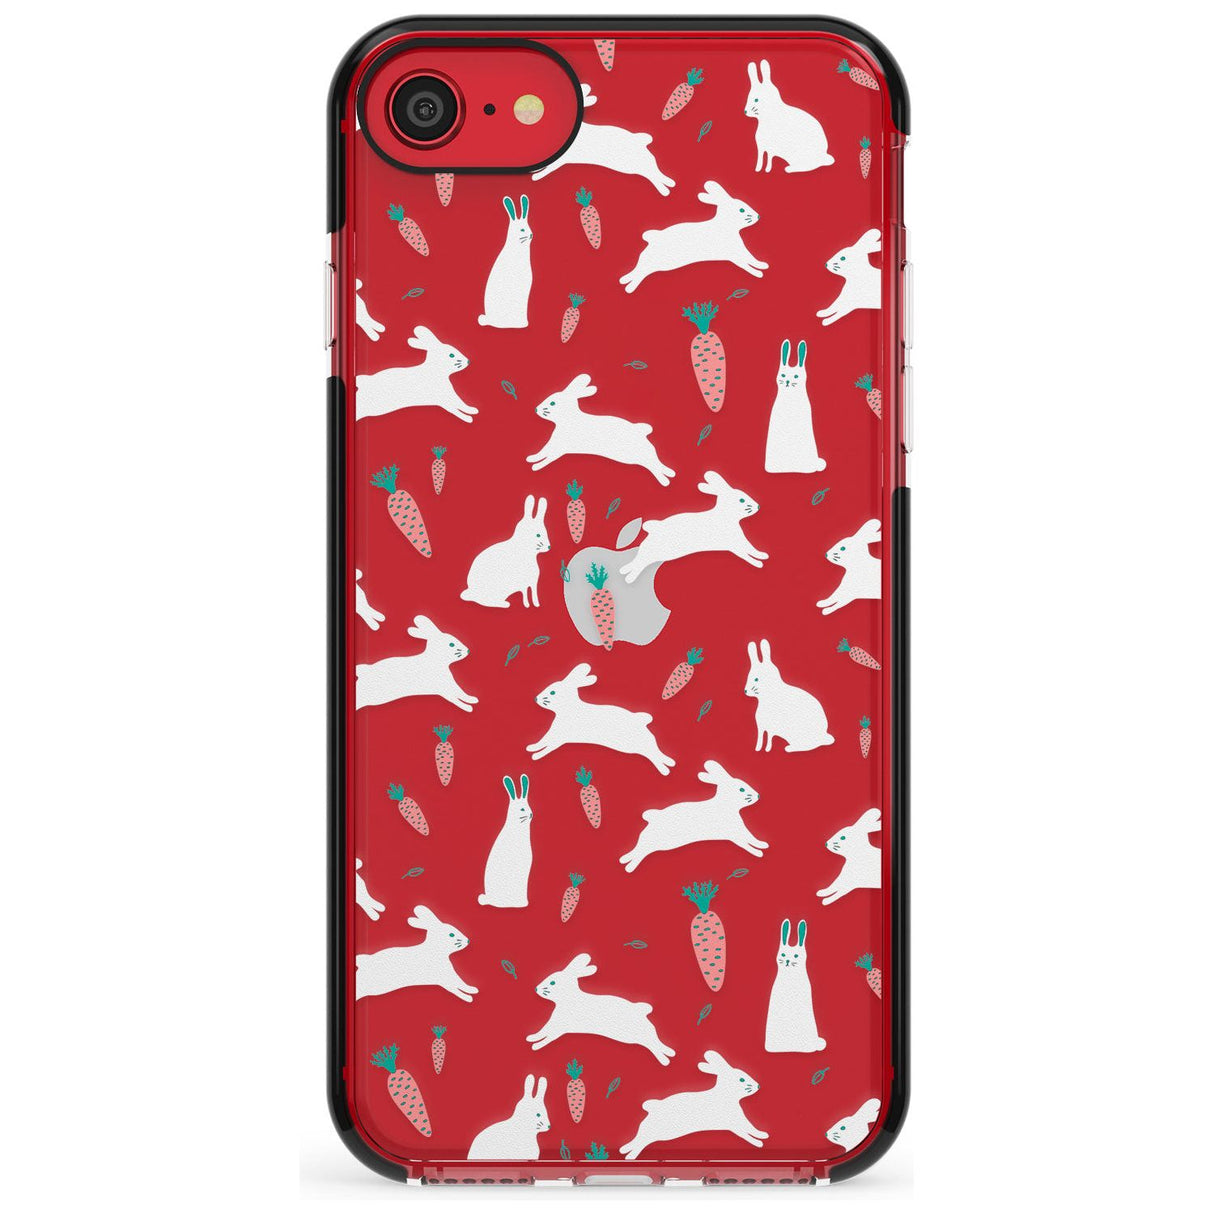 White Bunnies and Carrots Black Impact Phone Case for iPhone SE 8 7 Plus